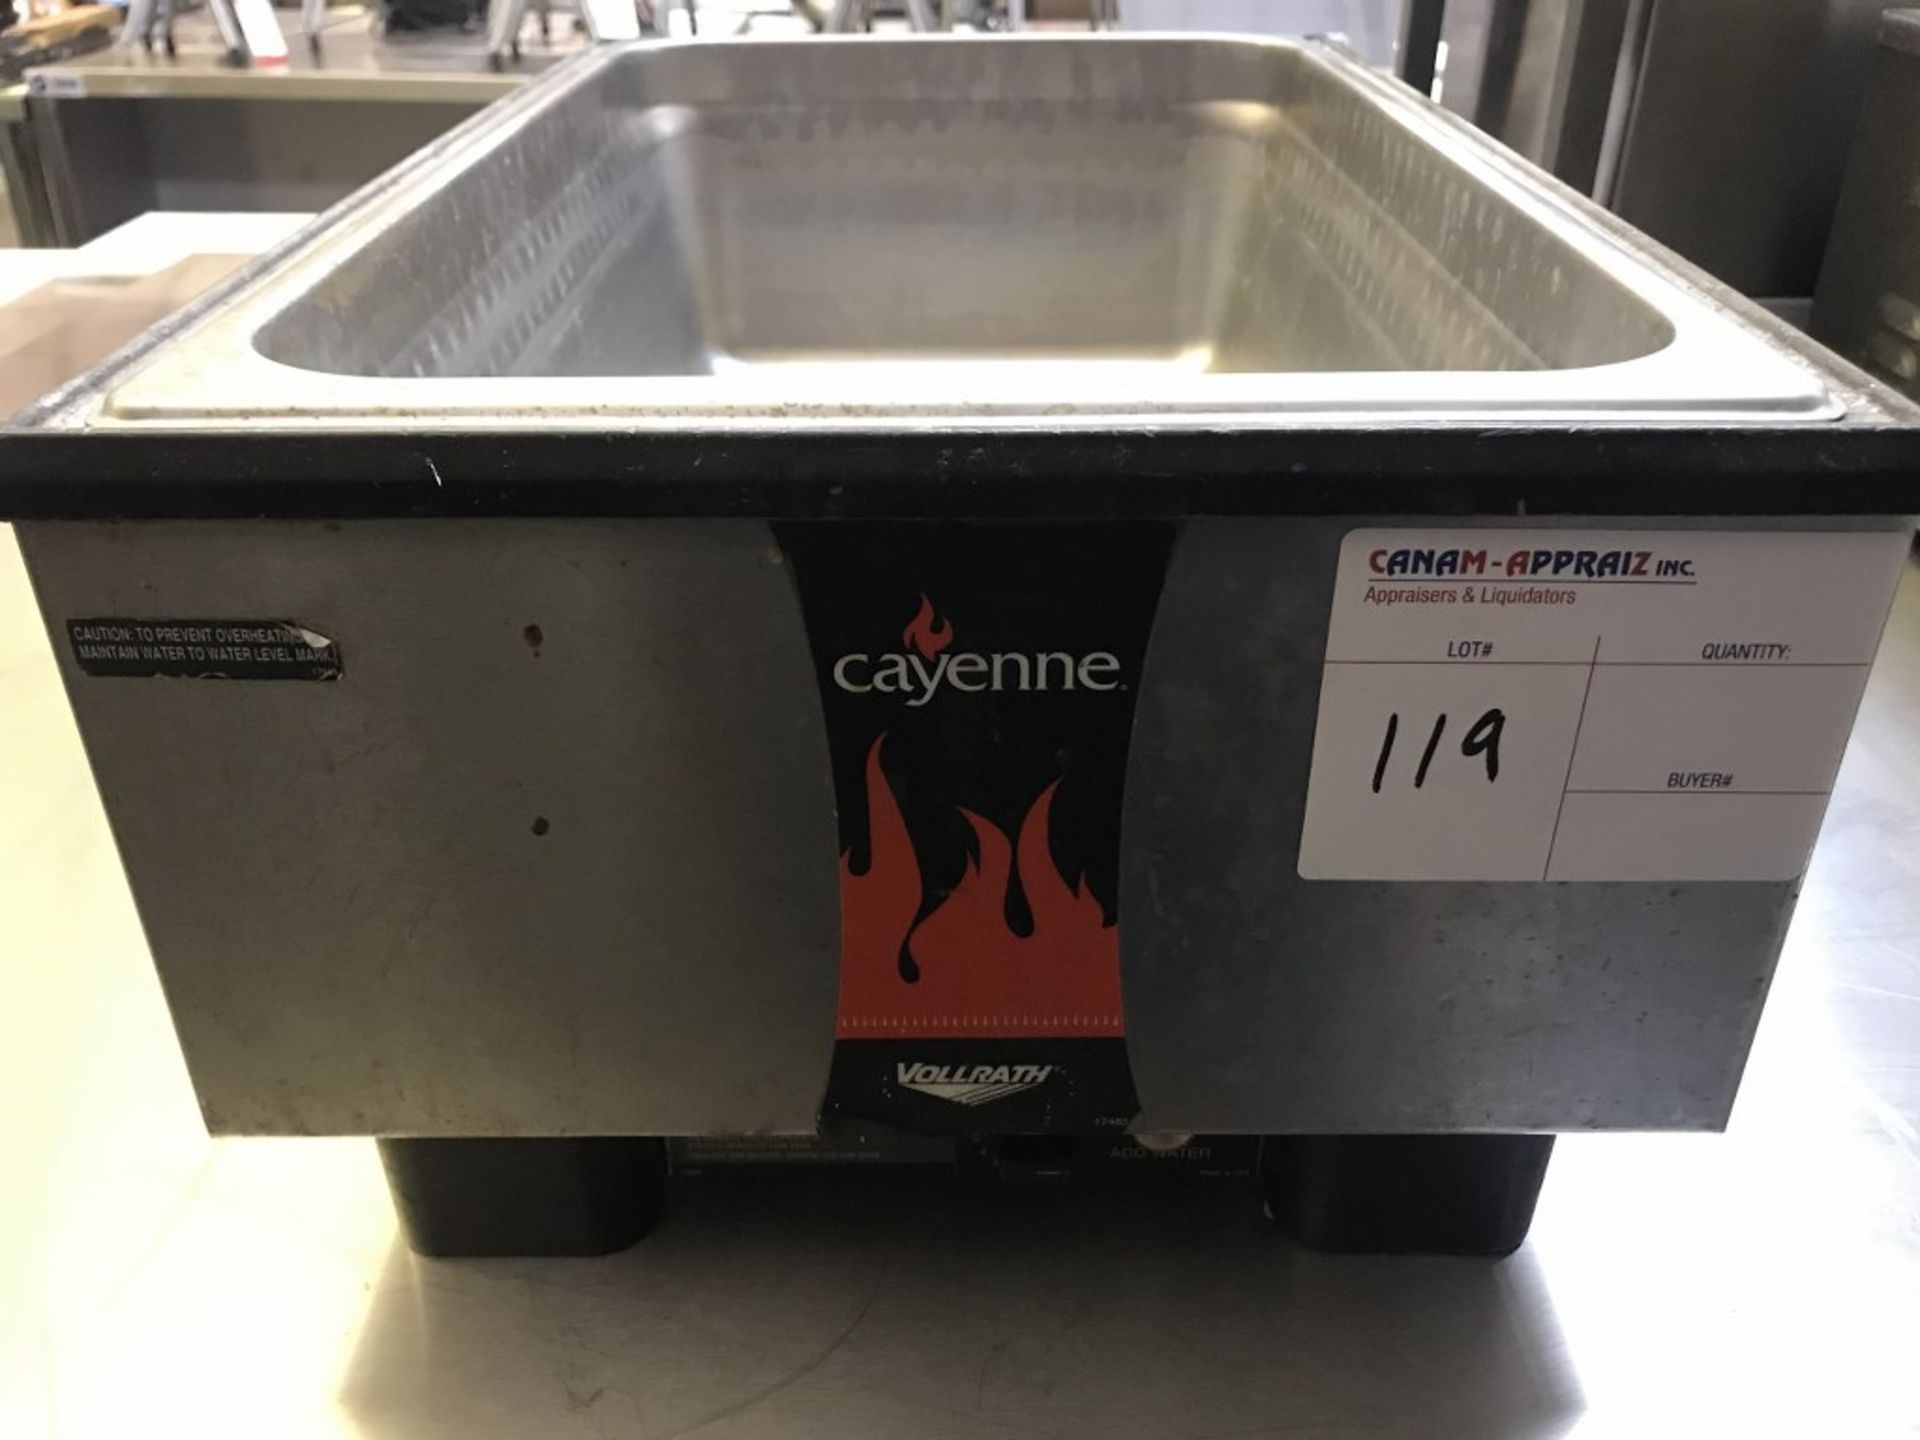 VOLLPATH CAYENNE - VARIABLE TEMPERATURE FOOD WARMER - MODEL # 1001